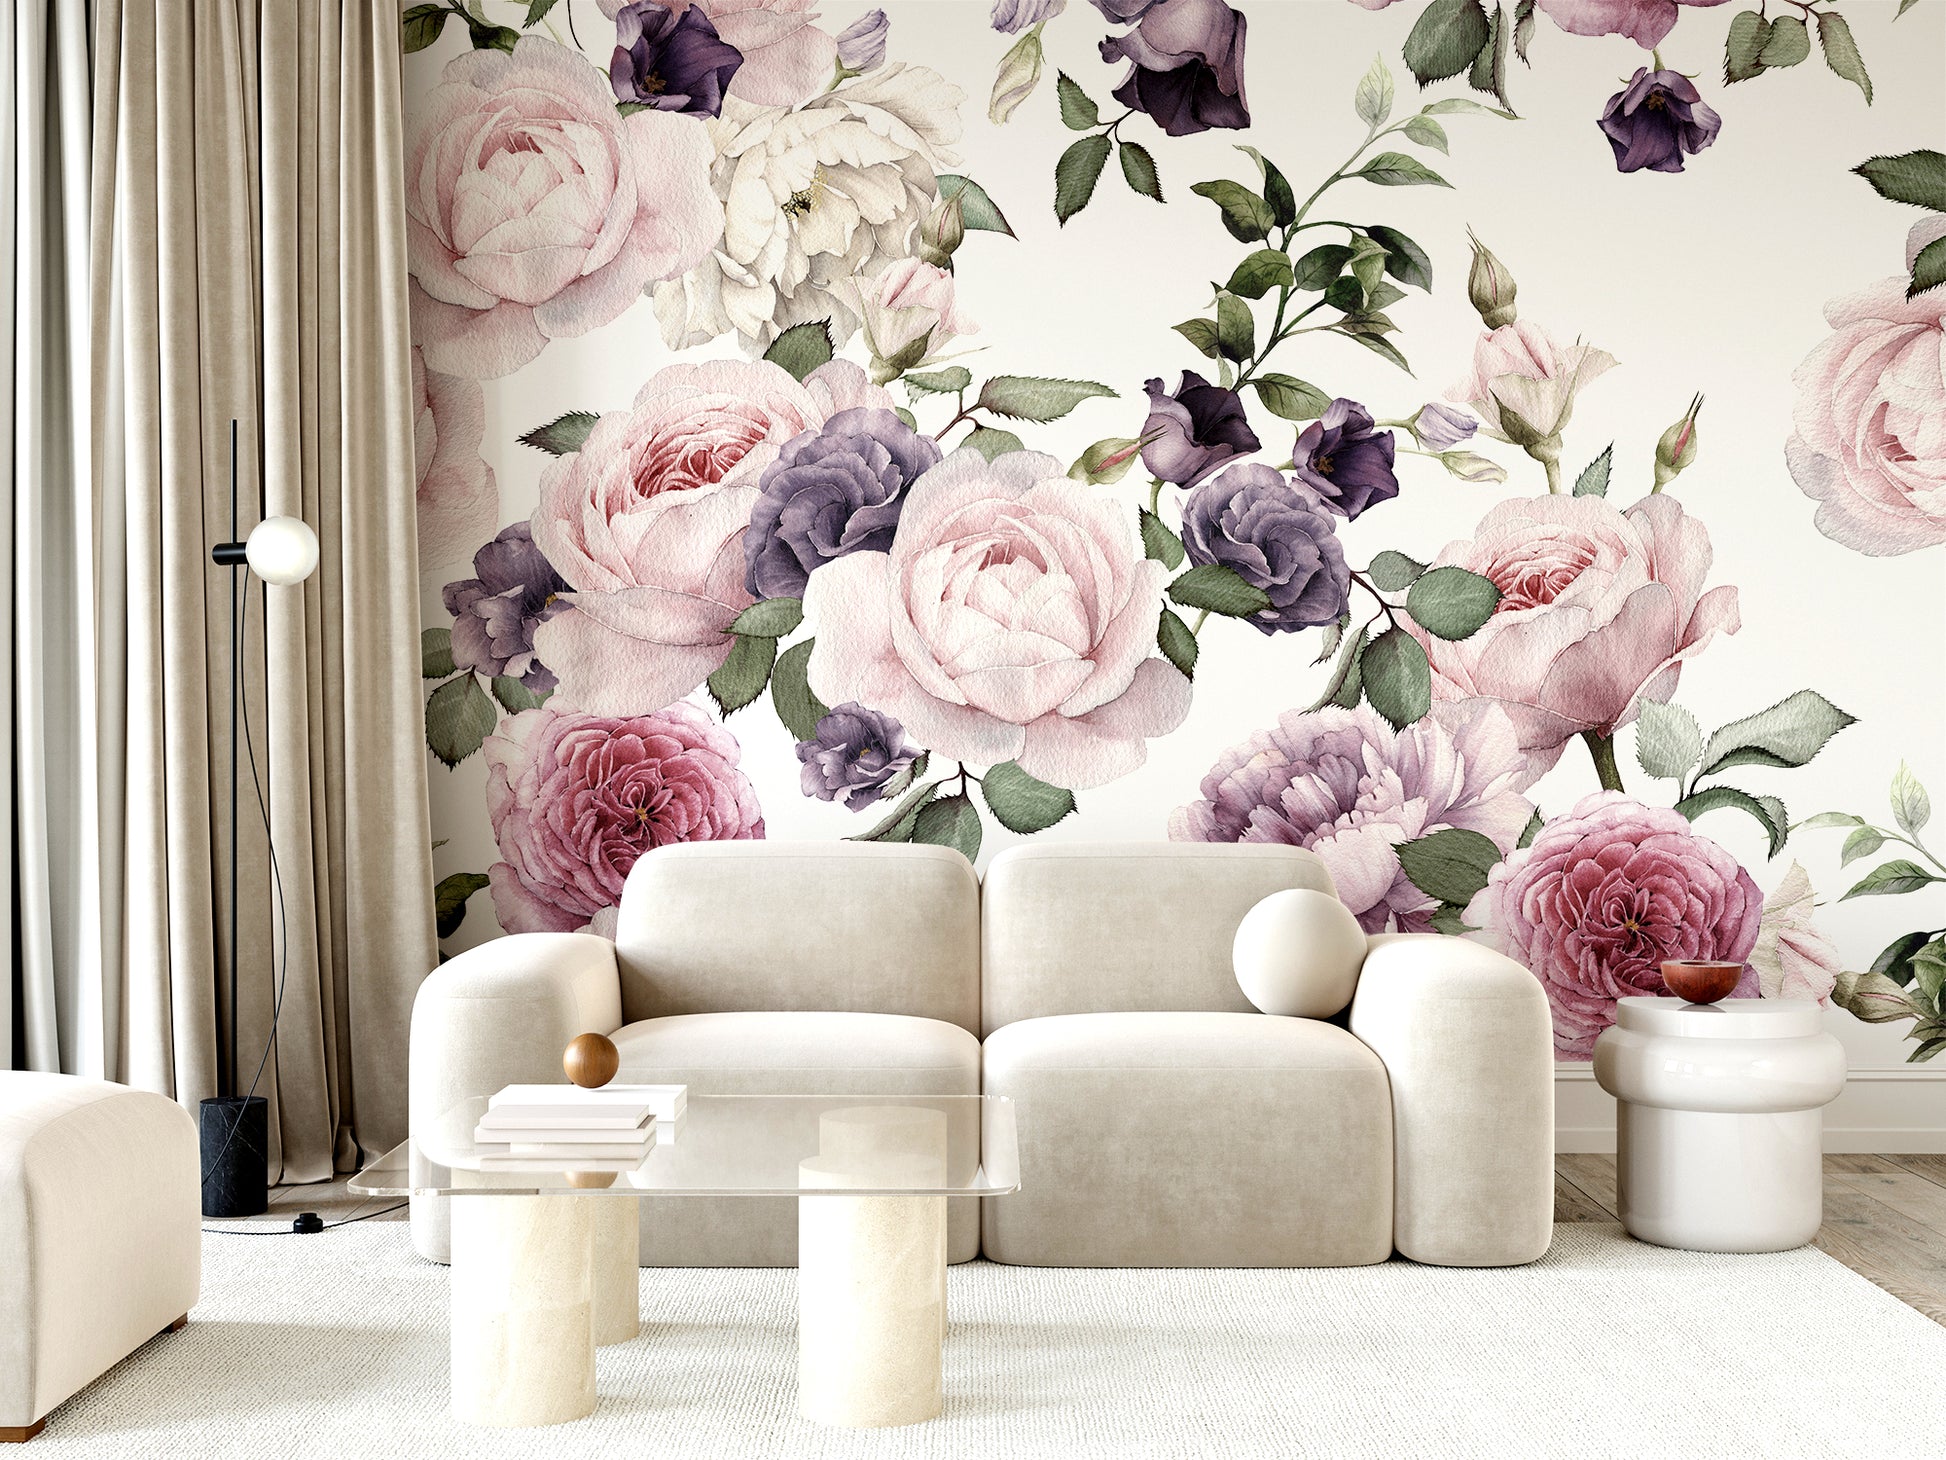 Rosalie Pink and Purple Roses Wallpaper in Living Room with Glass Table and Curtains